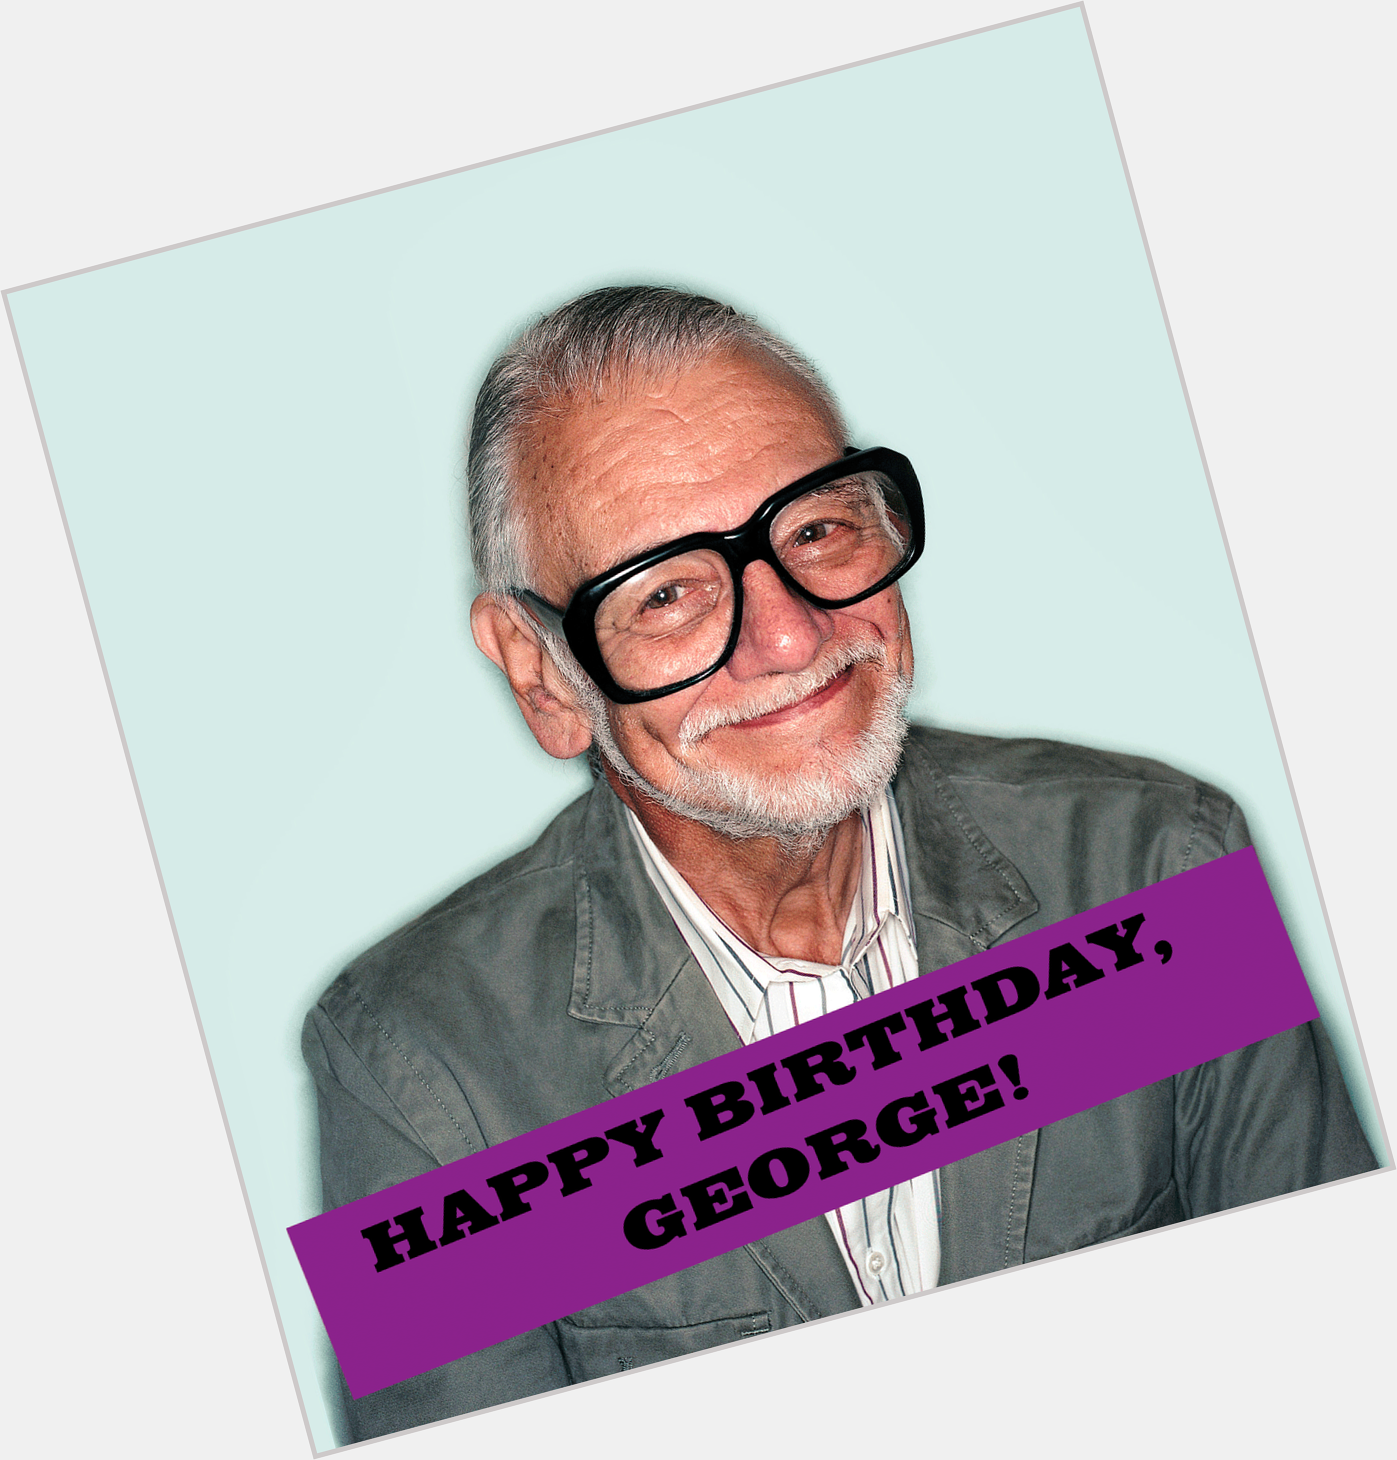 Happy Birthday George A. Romero. The Zombie genre patriarch who started it all in 1968 with Night of the Living Dead. 